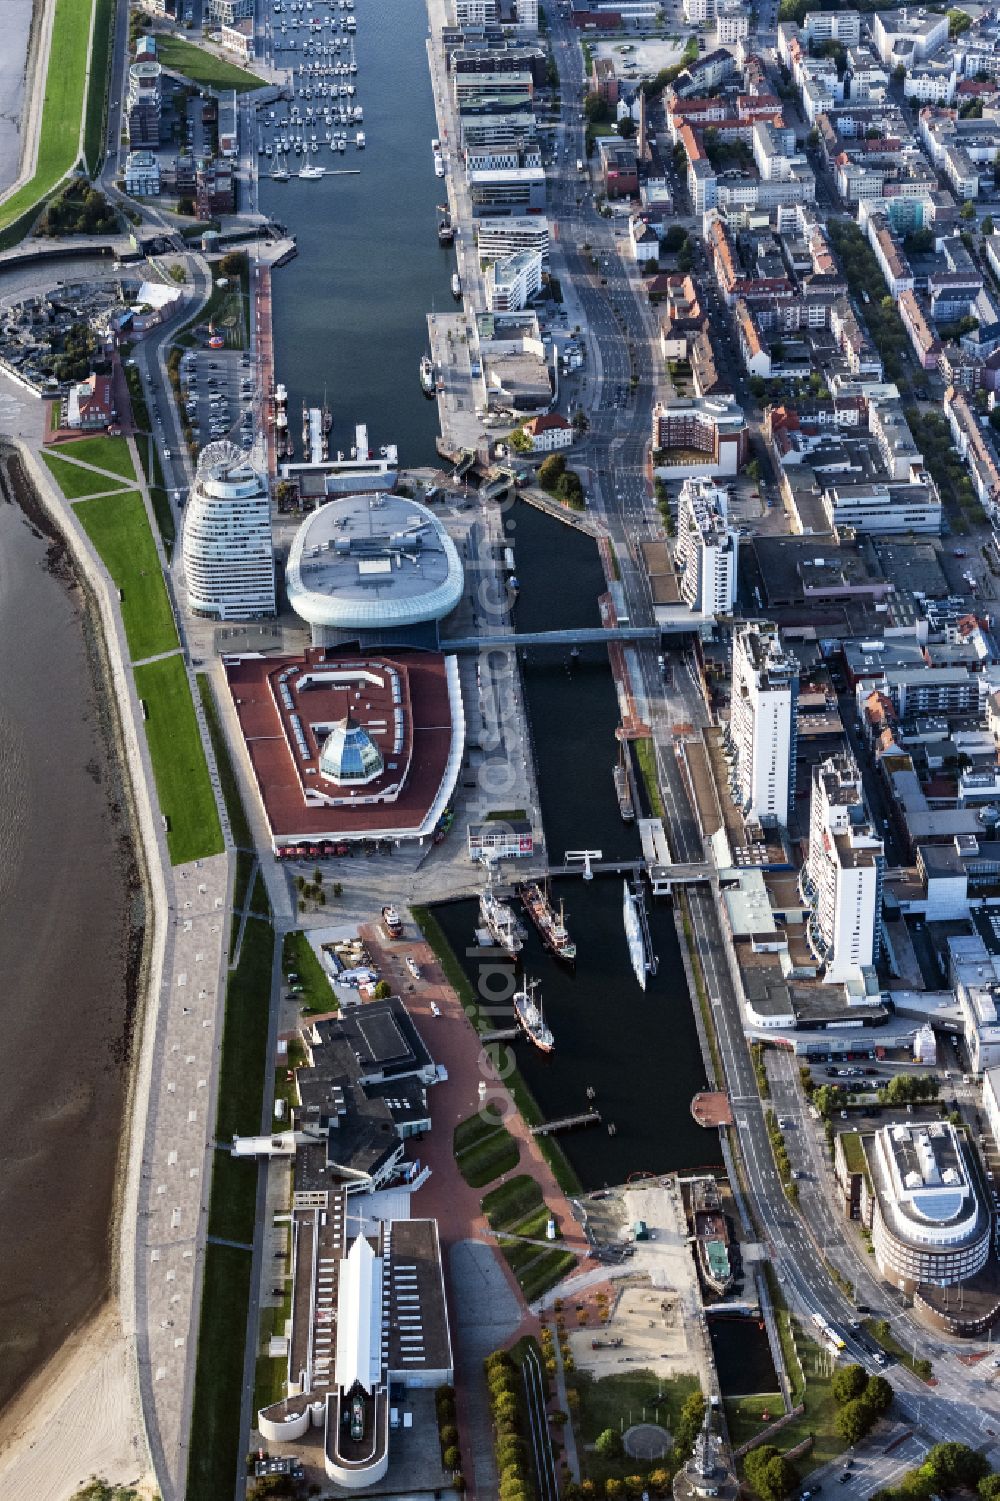 Bremerhaven from above - Atlantic Hotel Sail City and Klimahaus in Bremerhaven in the state of Bremen. The four star hotel with its bent front is located adjacent to the exhibition space of Klimahaus Bremerhaven 8 Ost and on the riverbank of the Weser